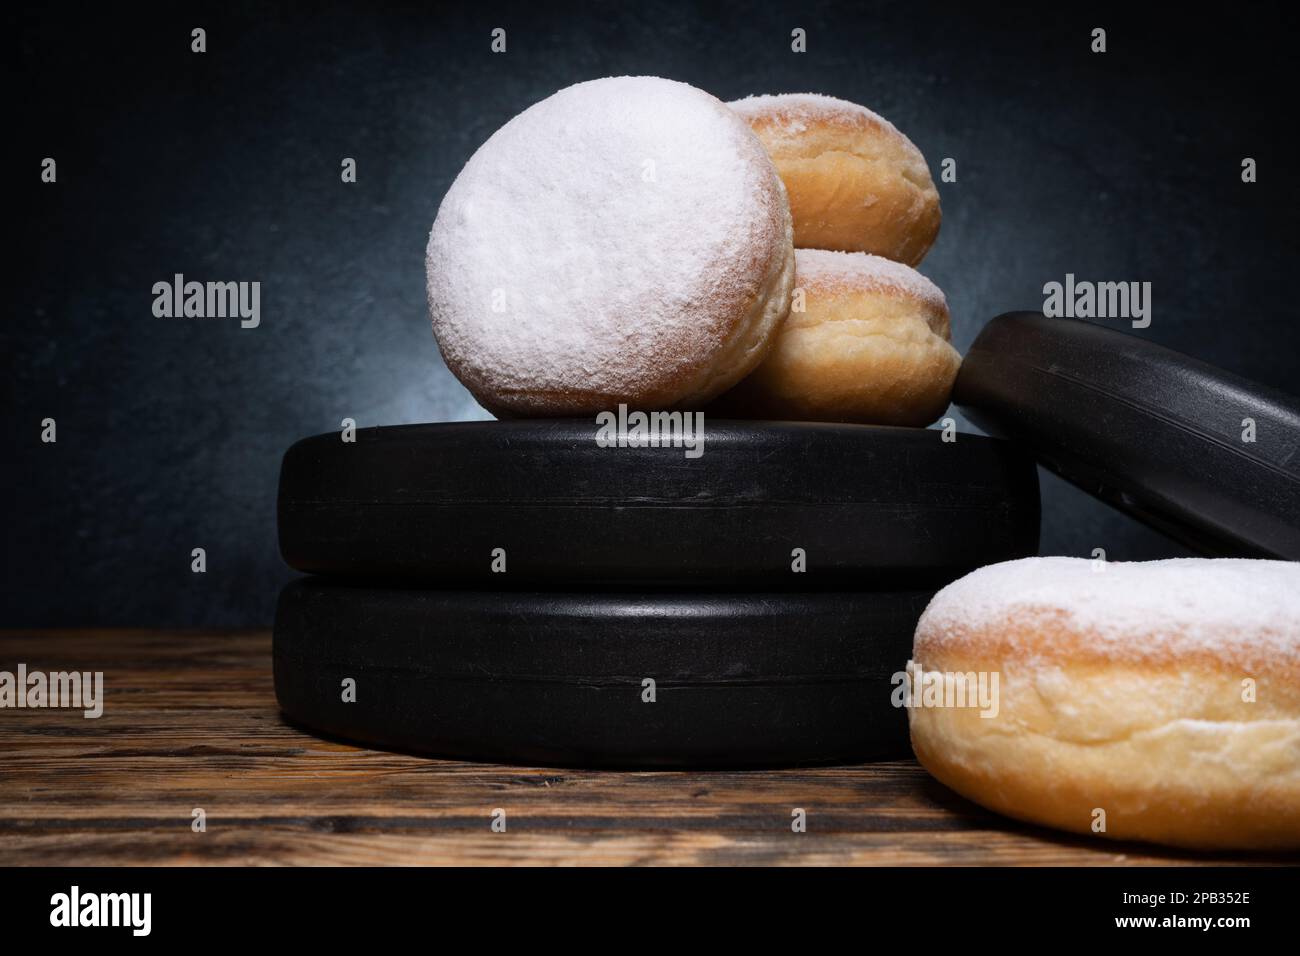 Gym dumbbells barbell weight plates and Polish pączki deep-fried doughnuts. Fat Thursday pączek in Poland. Healthy diet choice concept. Stock Photo